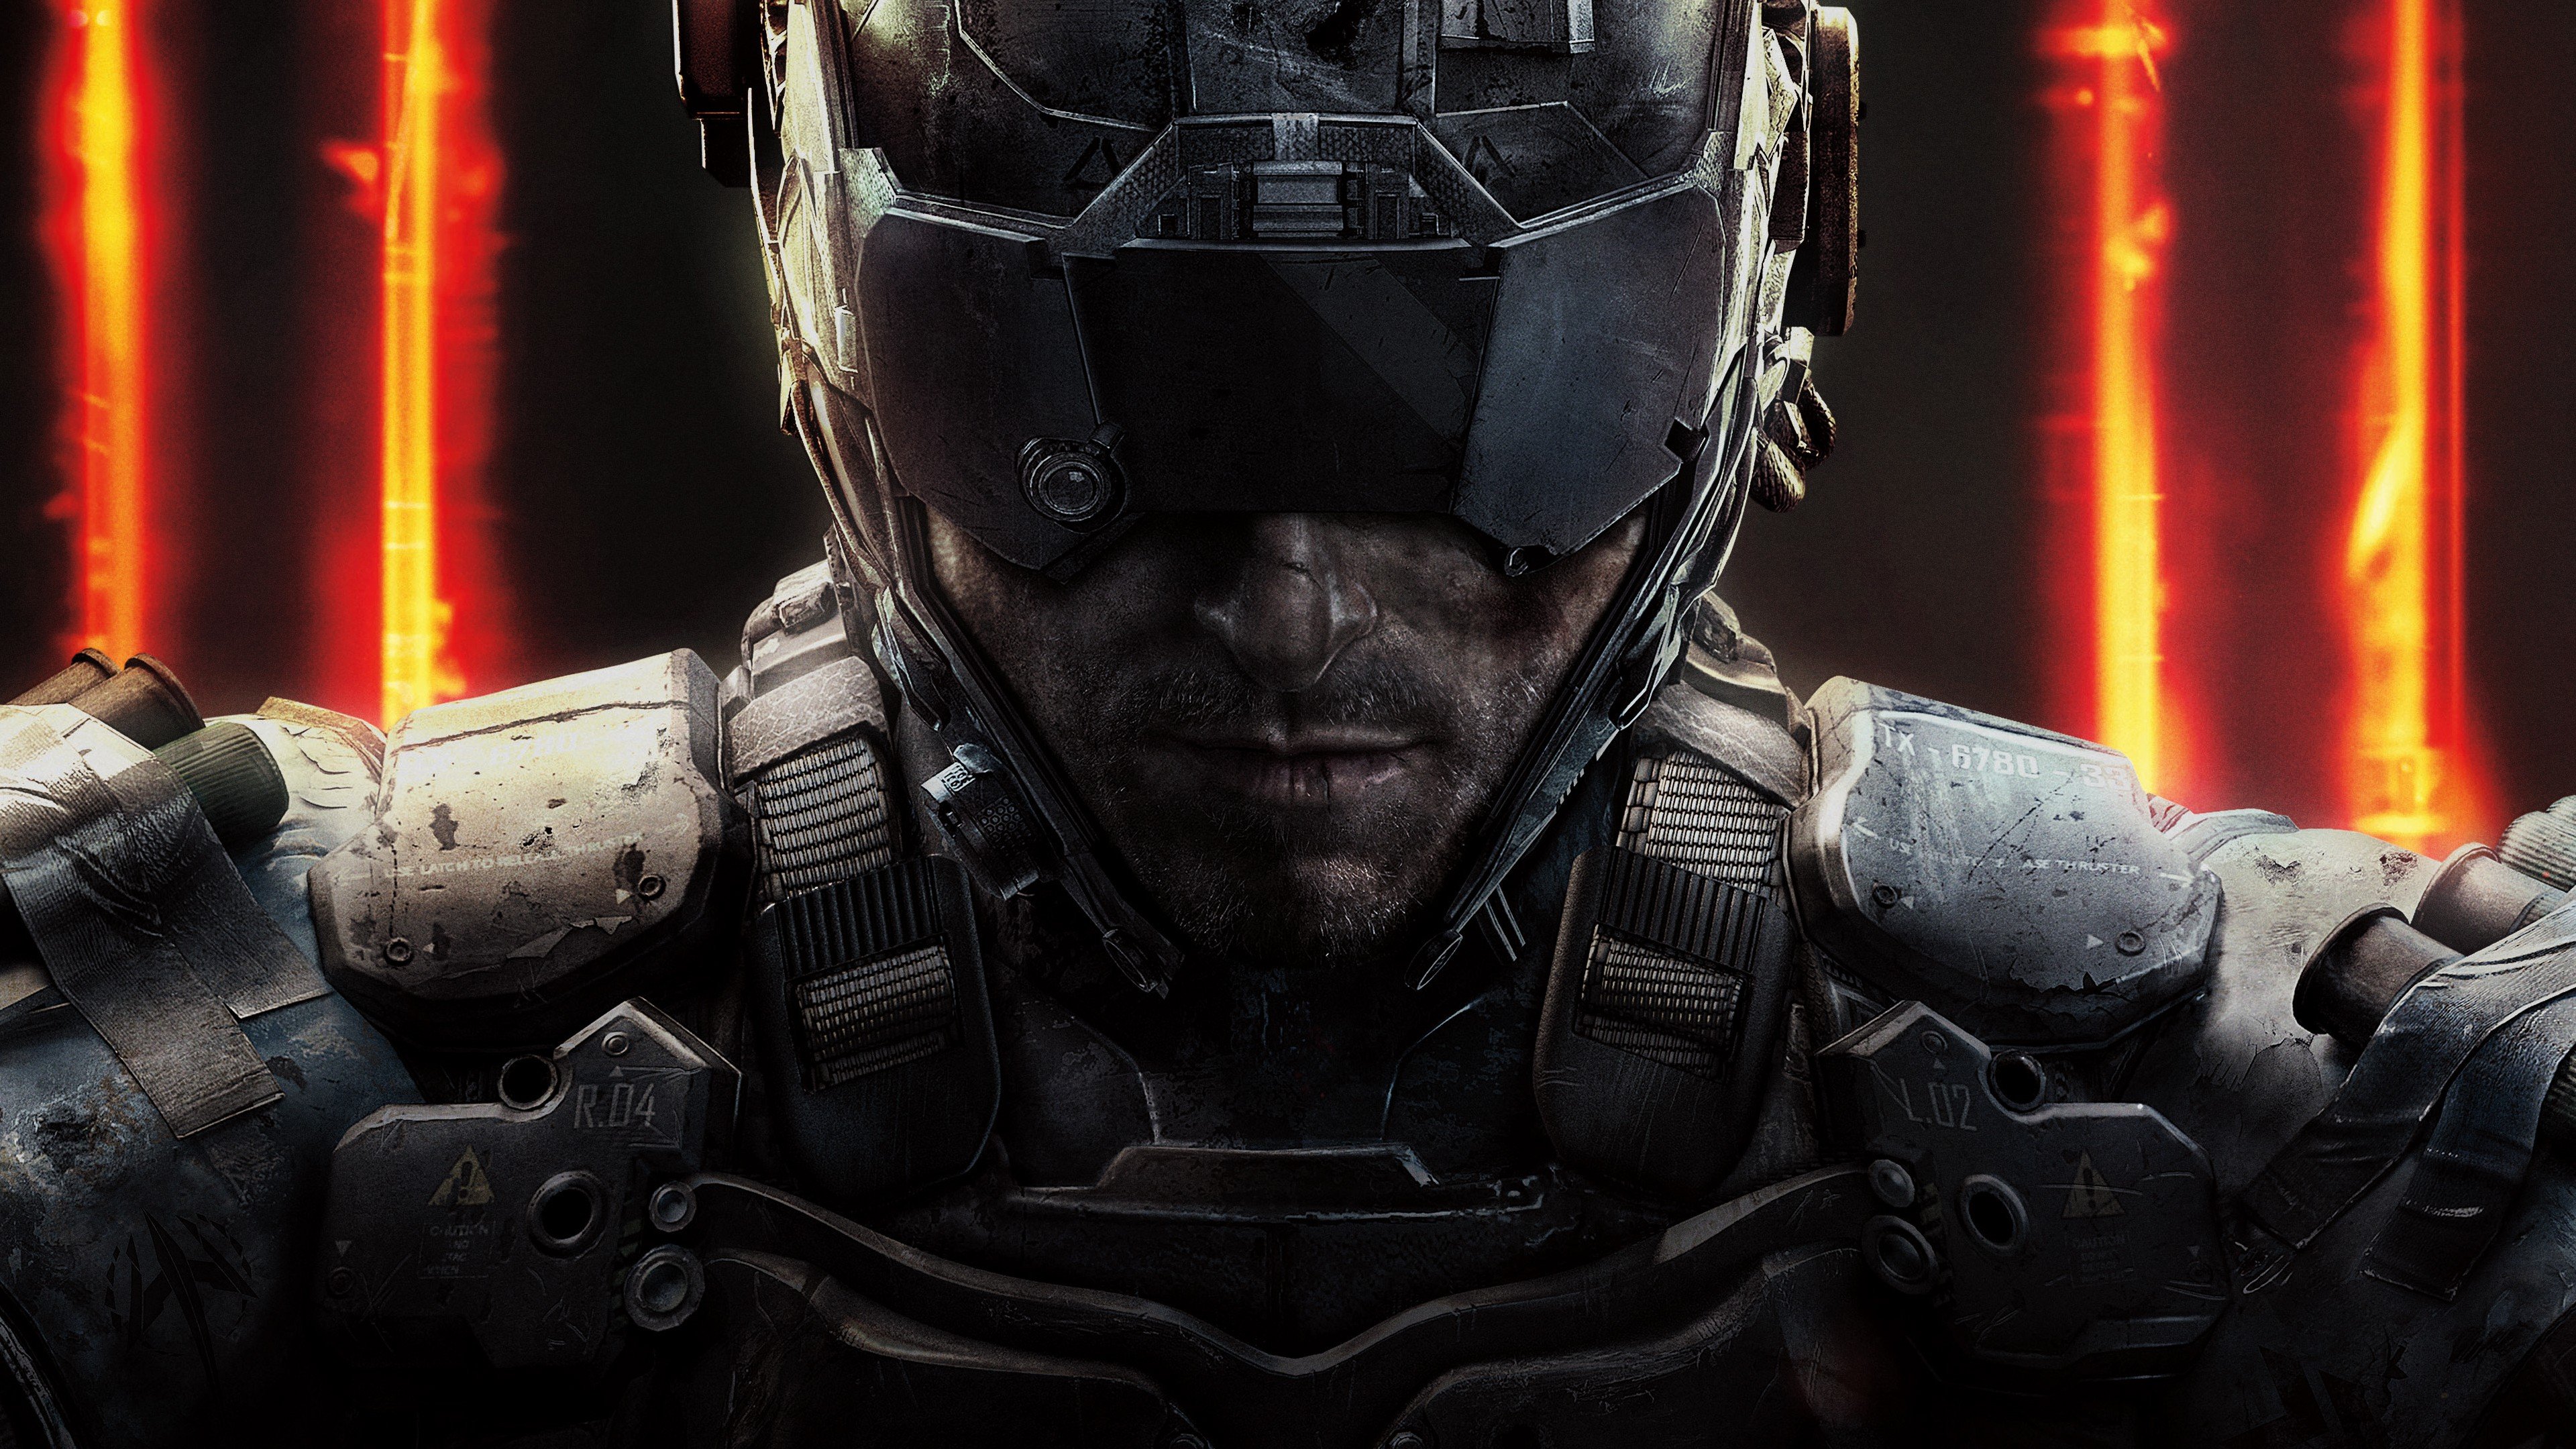 Video Game Call of Duty: Black Ops III HD Wallpaper | Background Image